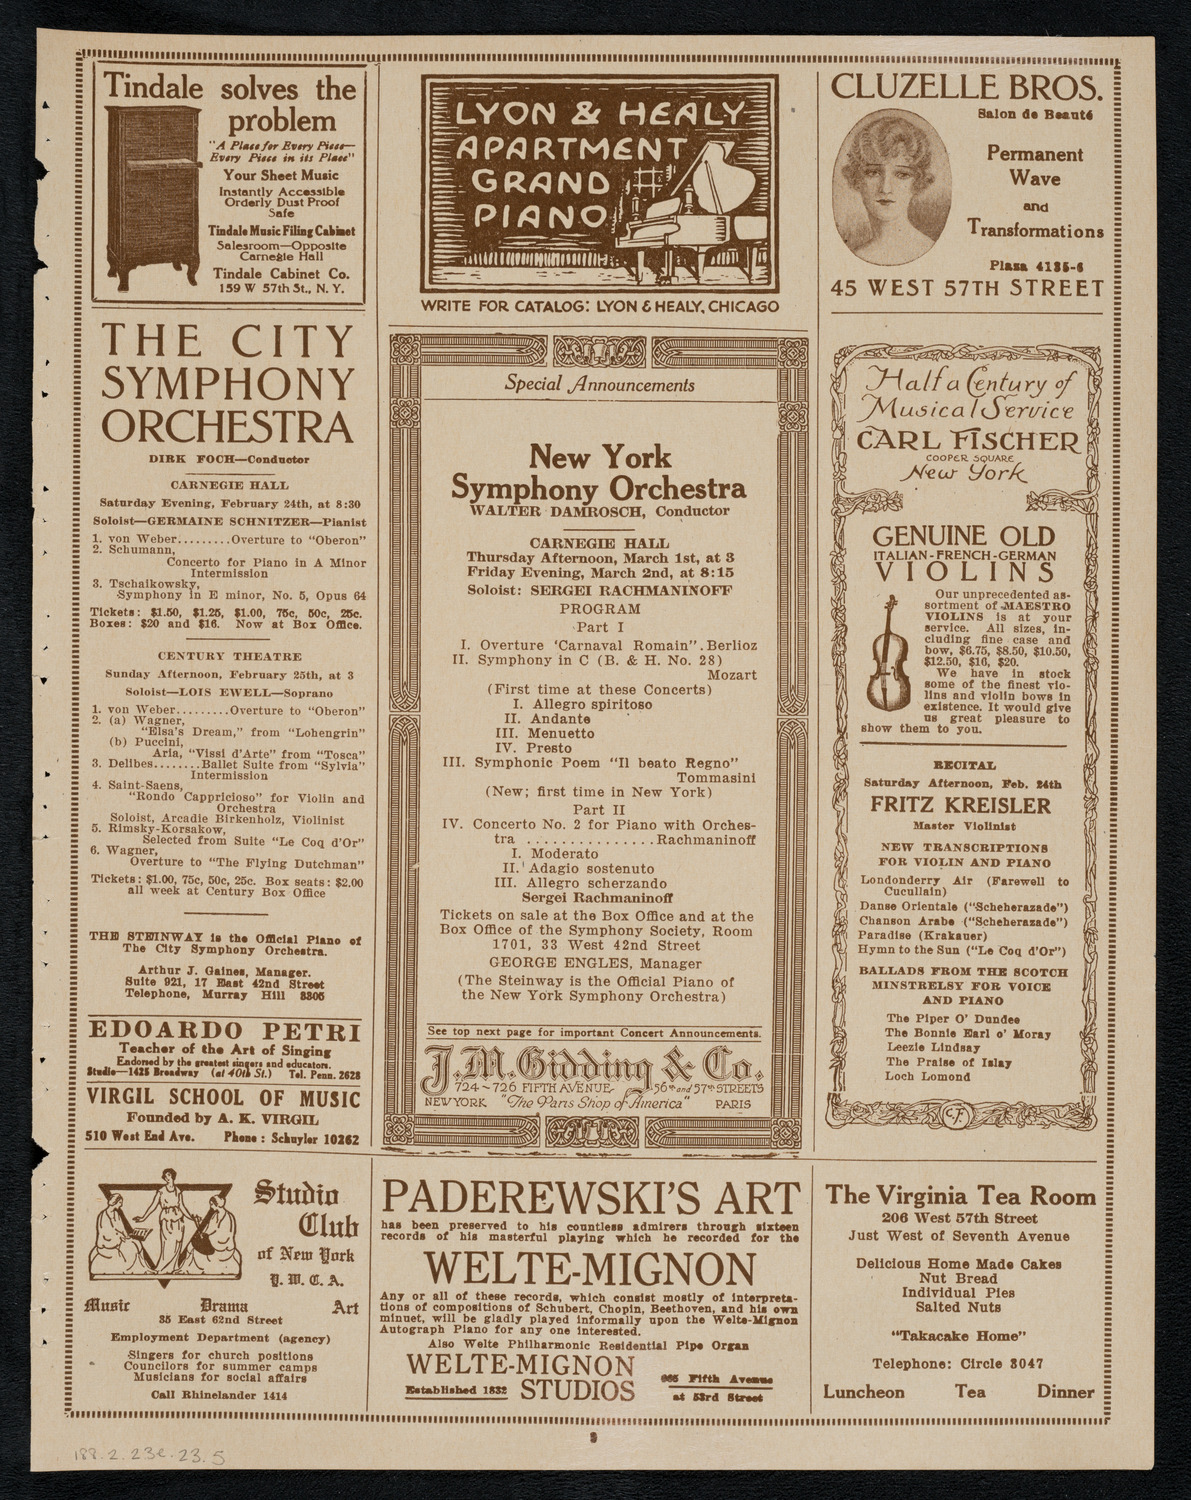 Universal Negro Improvement Association Meeting and Concert, February 23, 1923, program page 9